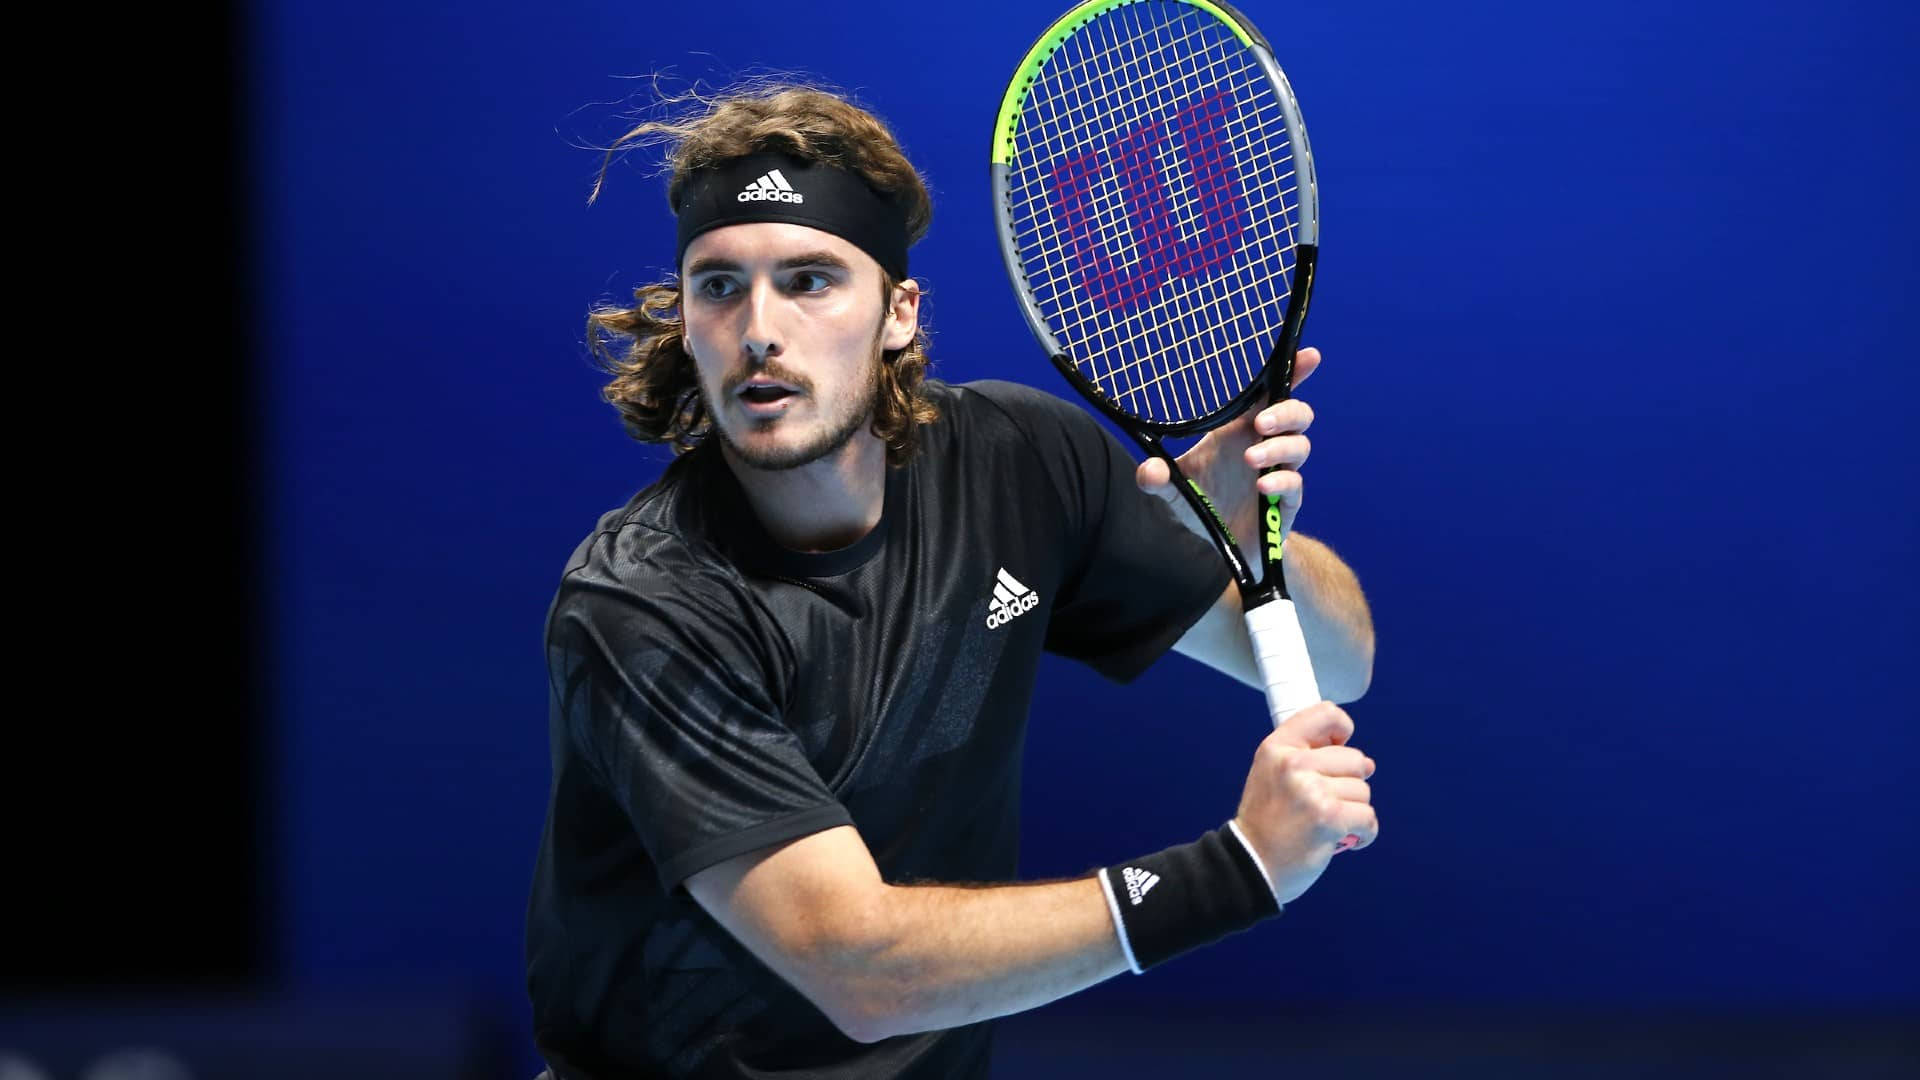 Tennis Star Stefanos Tsitsipas With Racket In Action Background